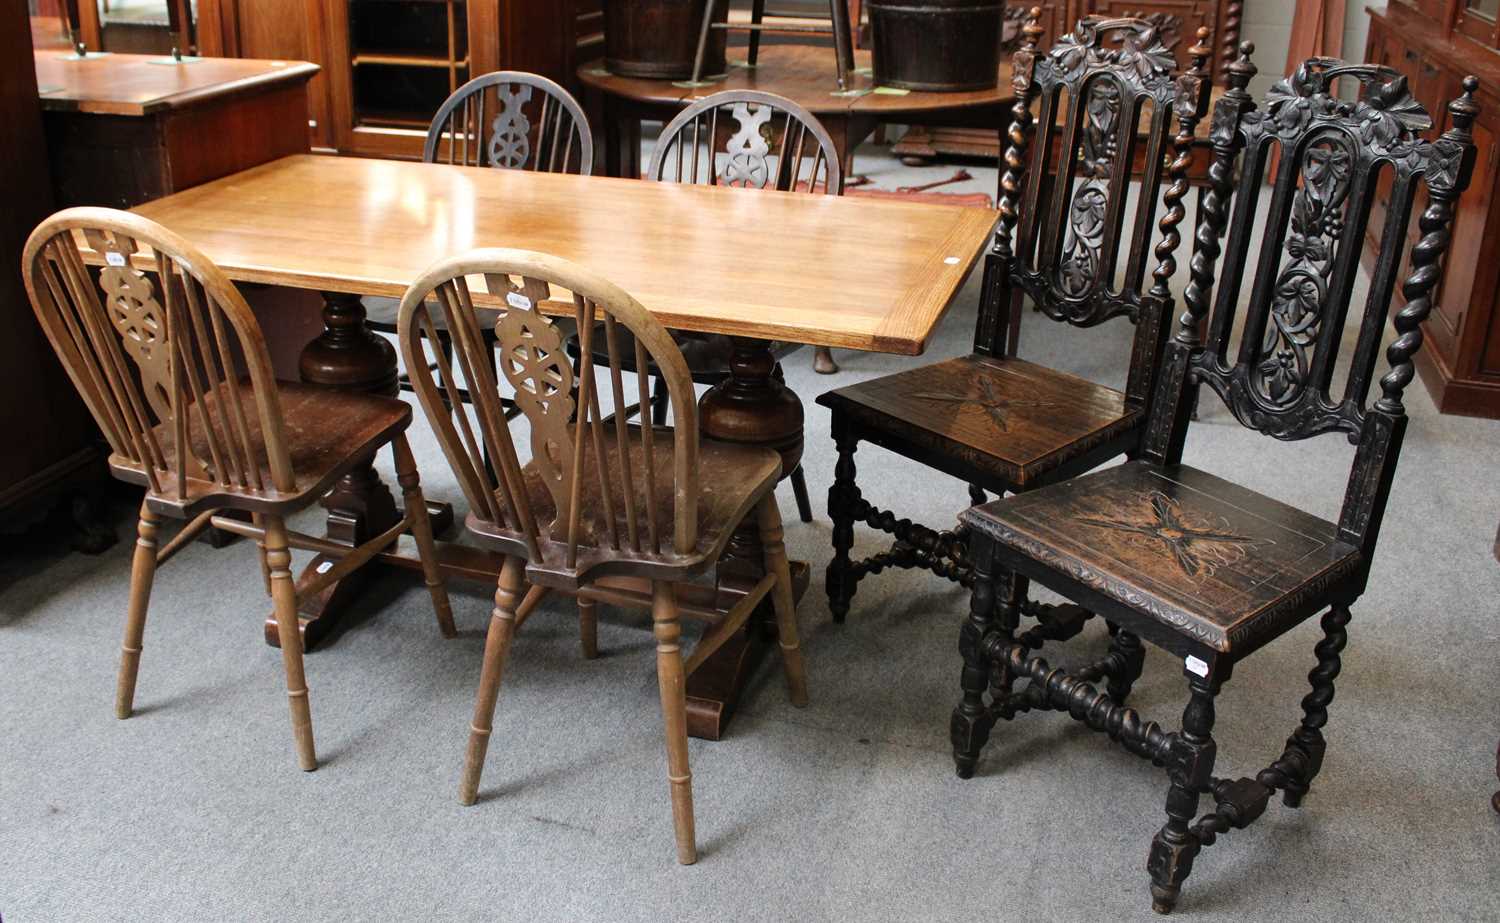 A 20th Century Oak Dining Table, with trestle base, Four Similar Wheel Back Windsor Chairs and A